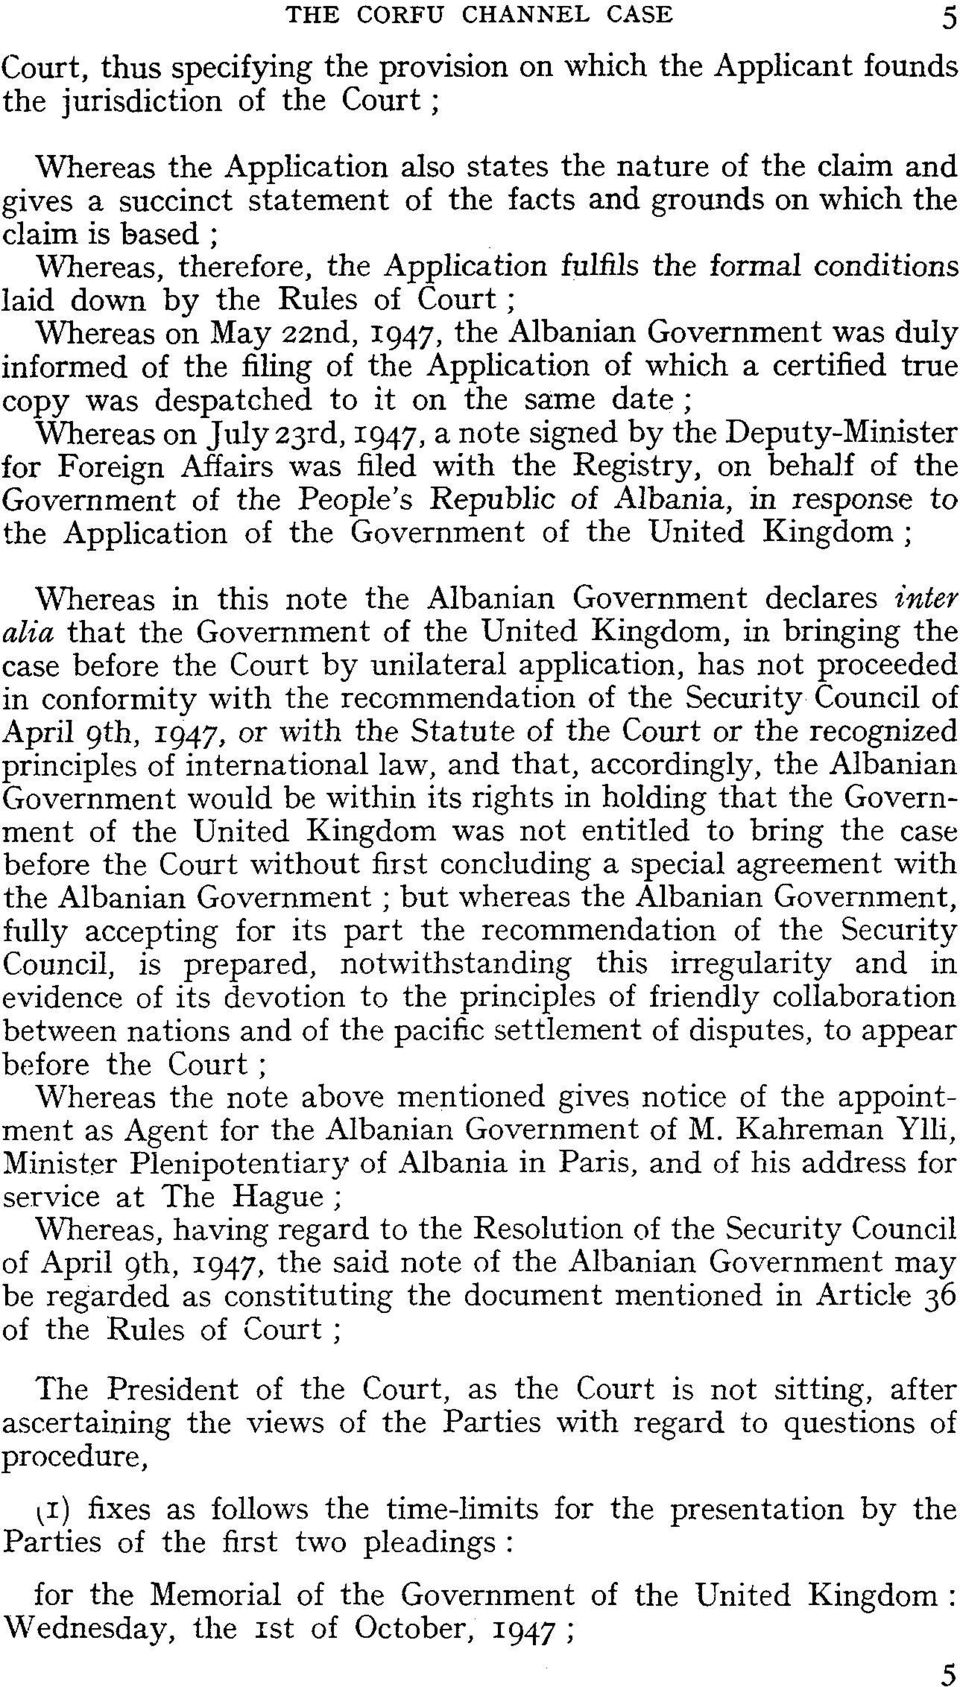 1947, the Albanian Government was duly informed of the filing of the Application of which a certified tme copy was despatched to it on the sâme date ; Whereas on Jiily 23rd, 1947, a note signed by